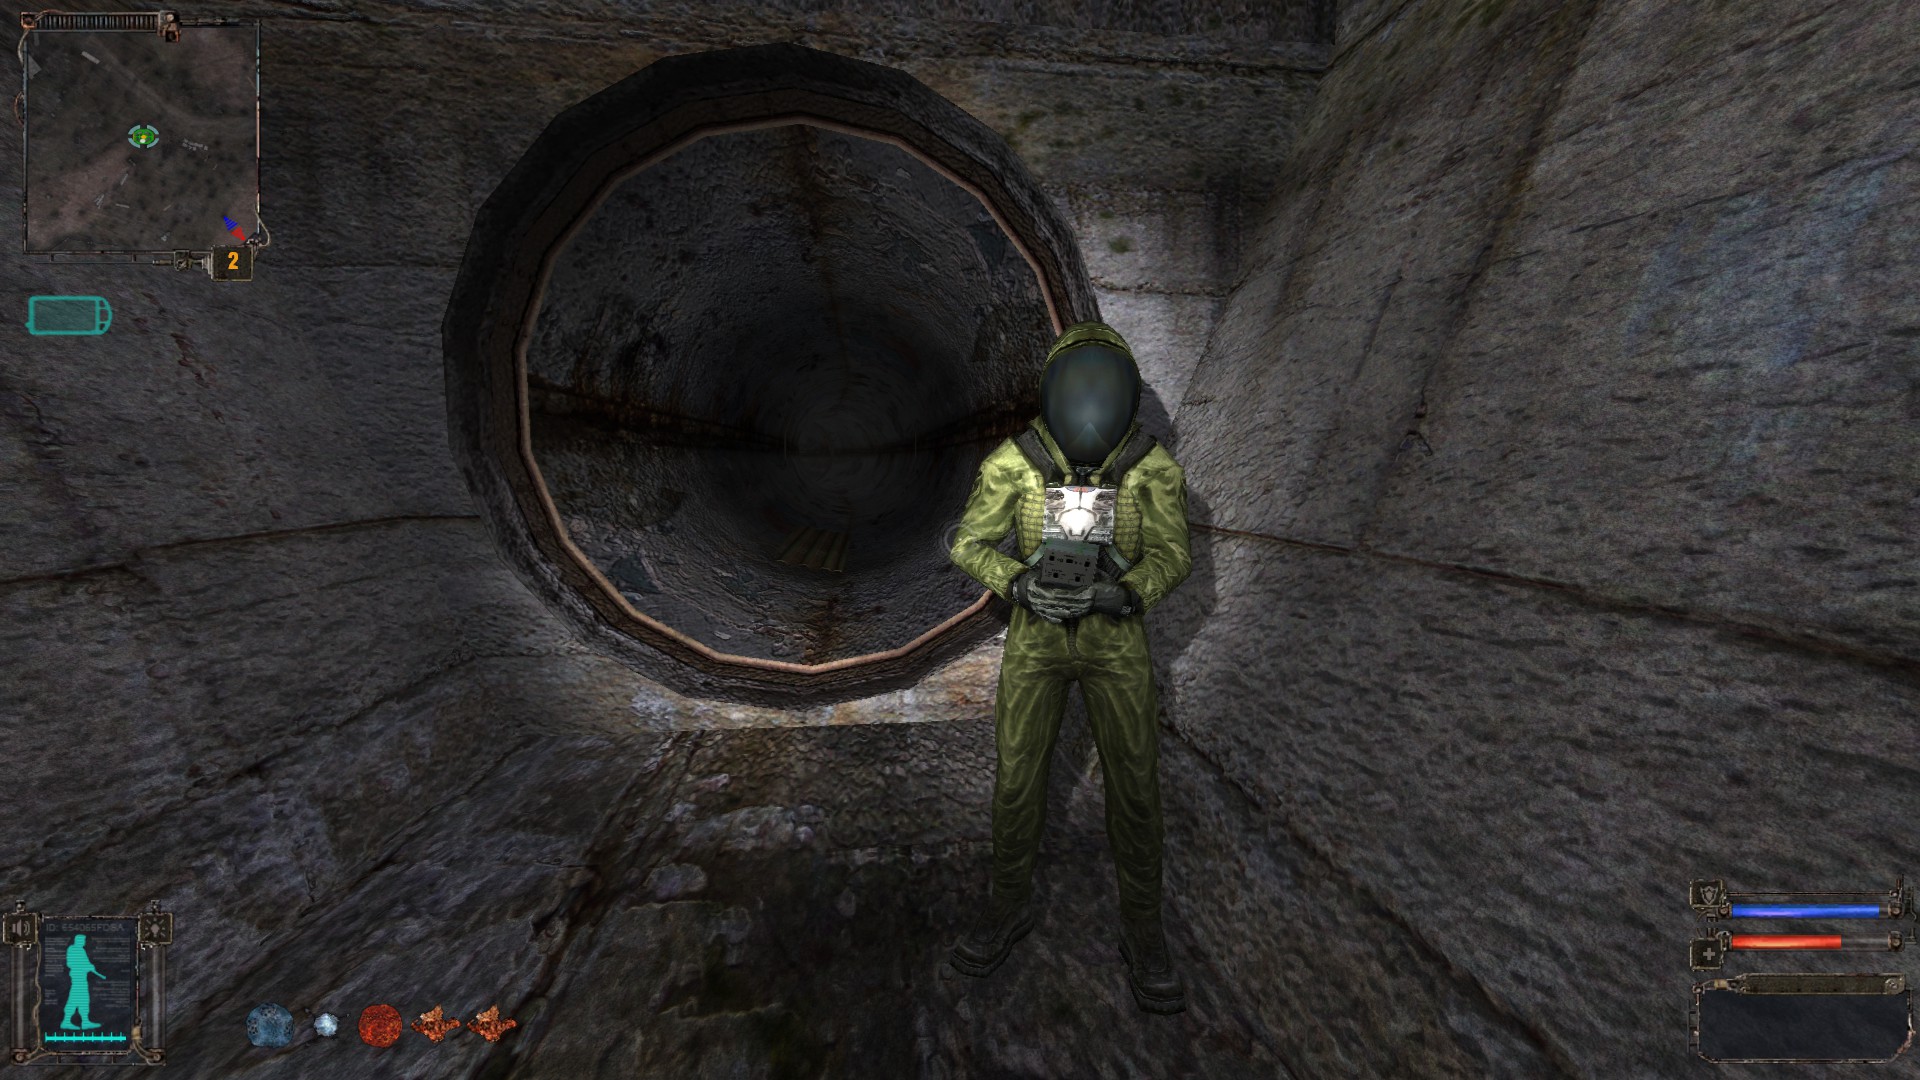 A person in a hazmat-style suit outside a sewer tunnel.